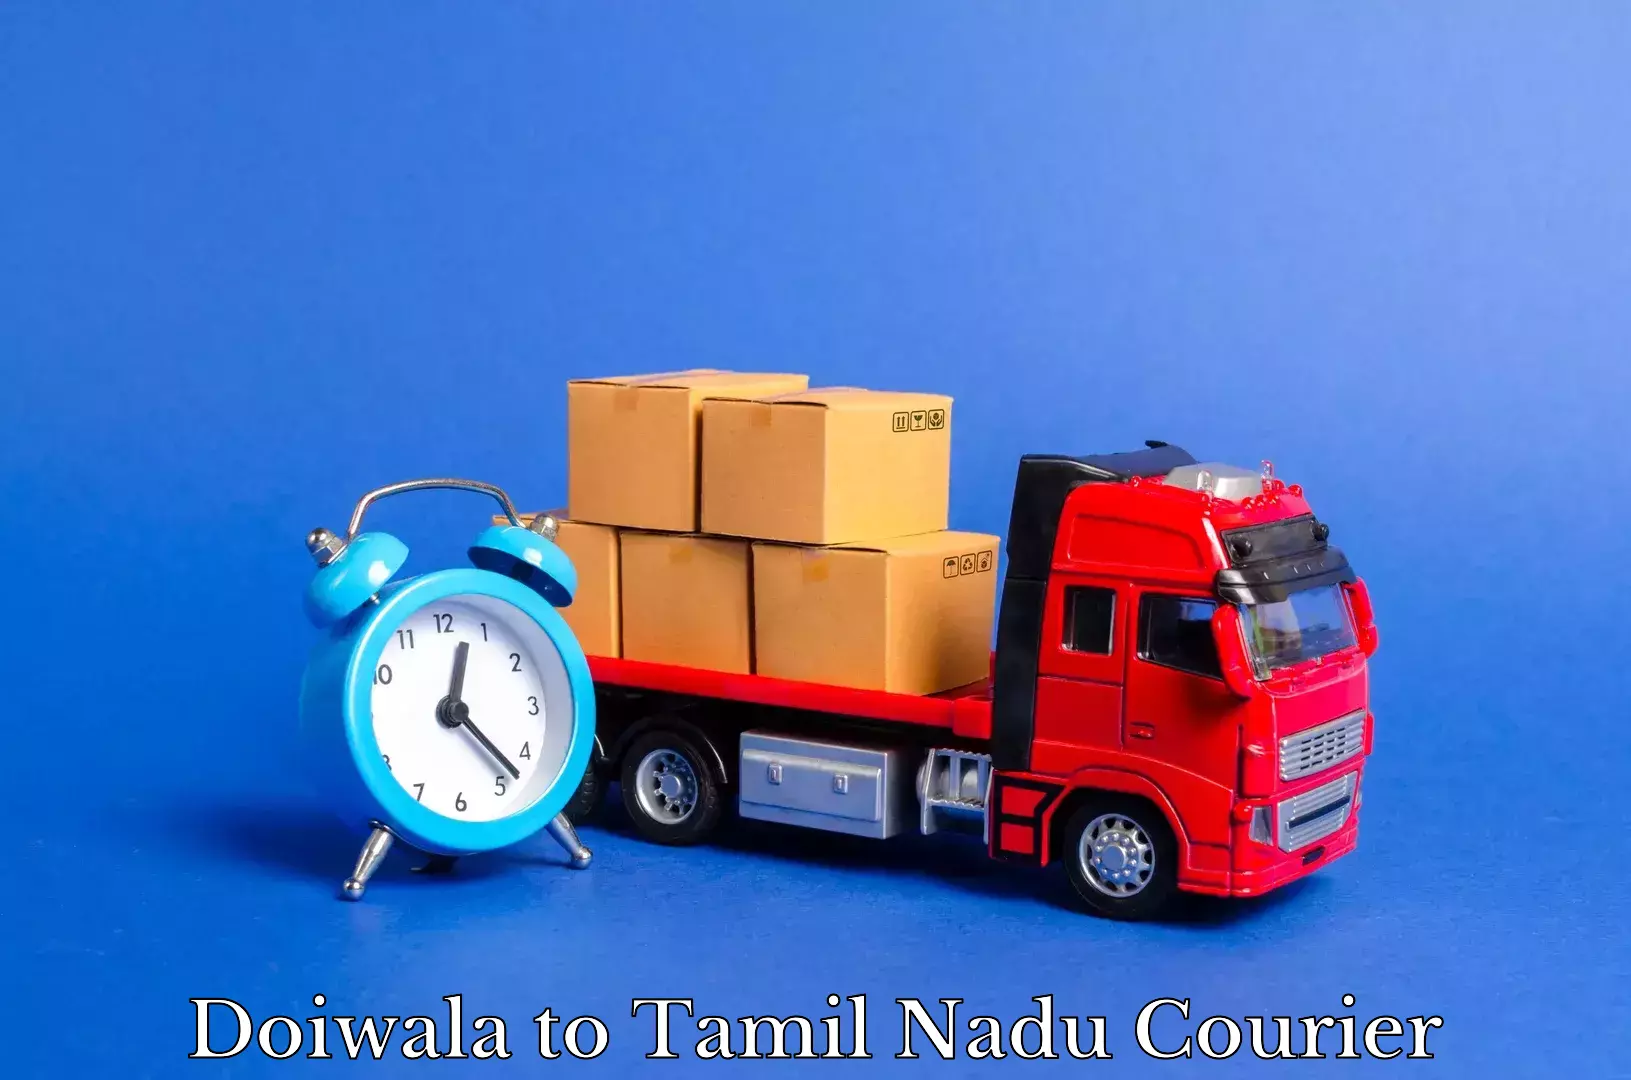 Furniture moving service in Doiwala to Chennai Port